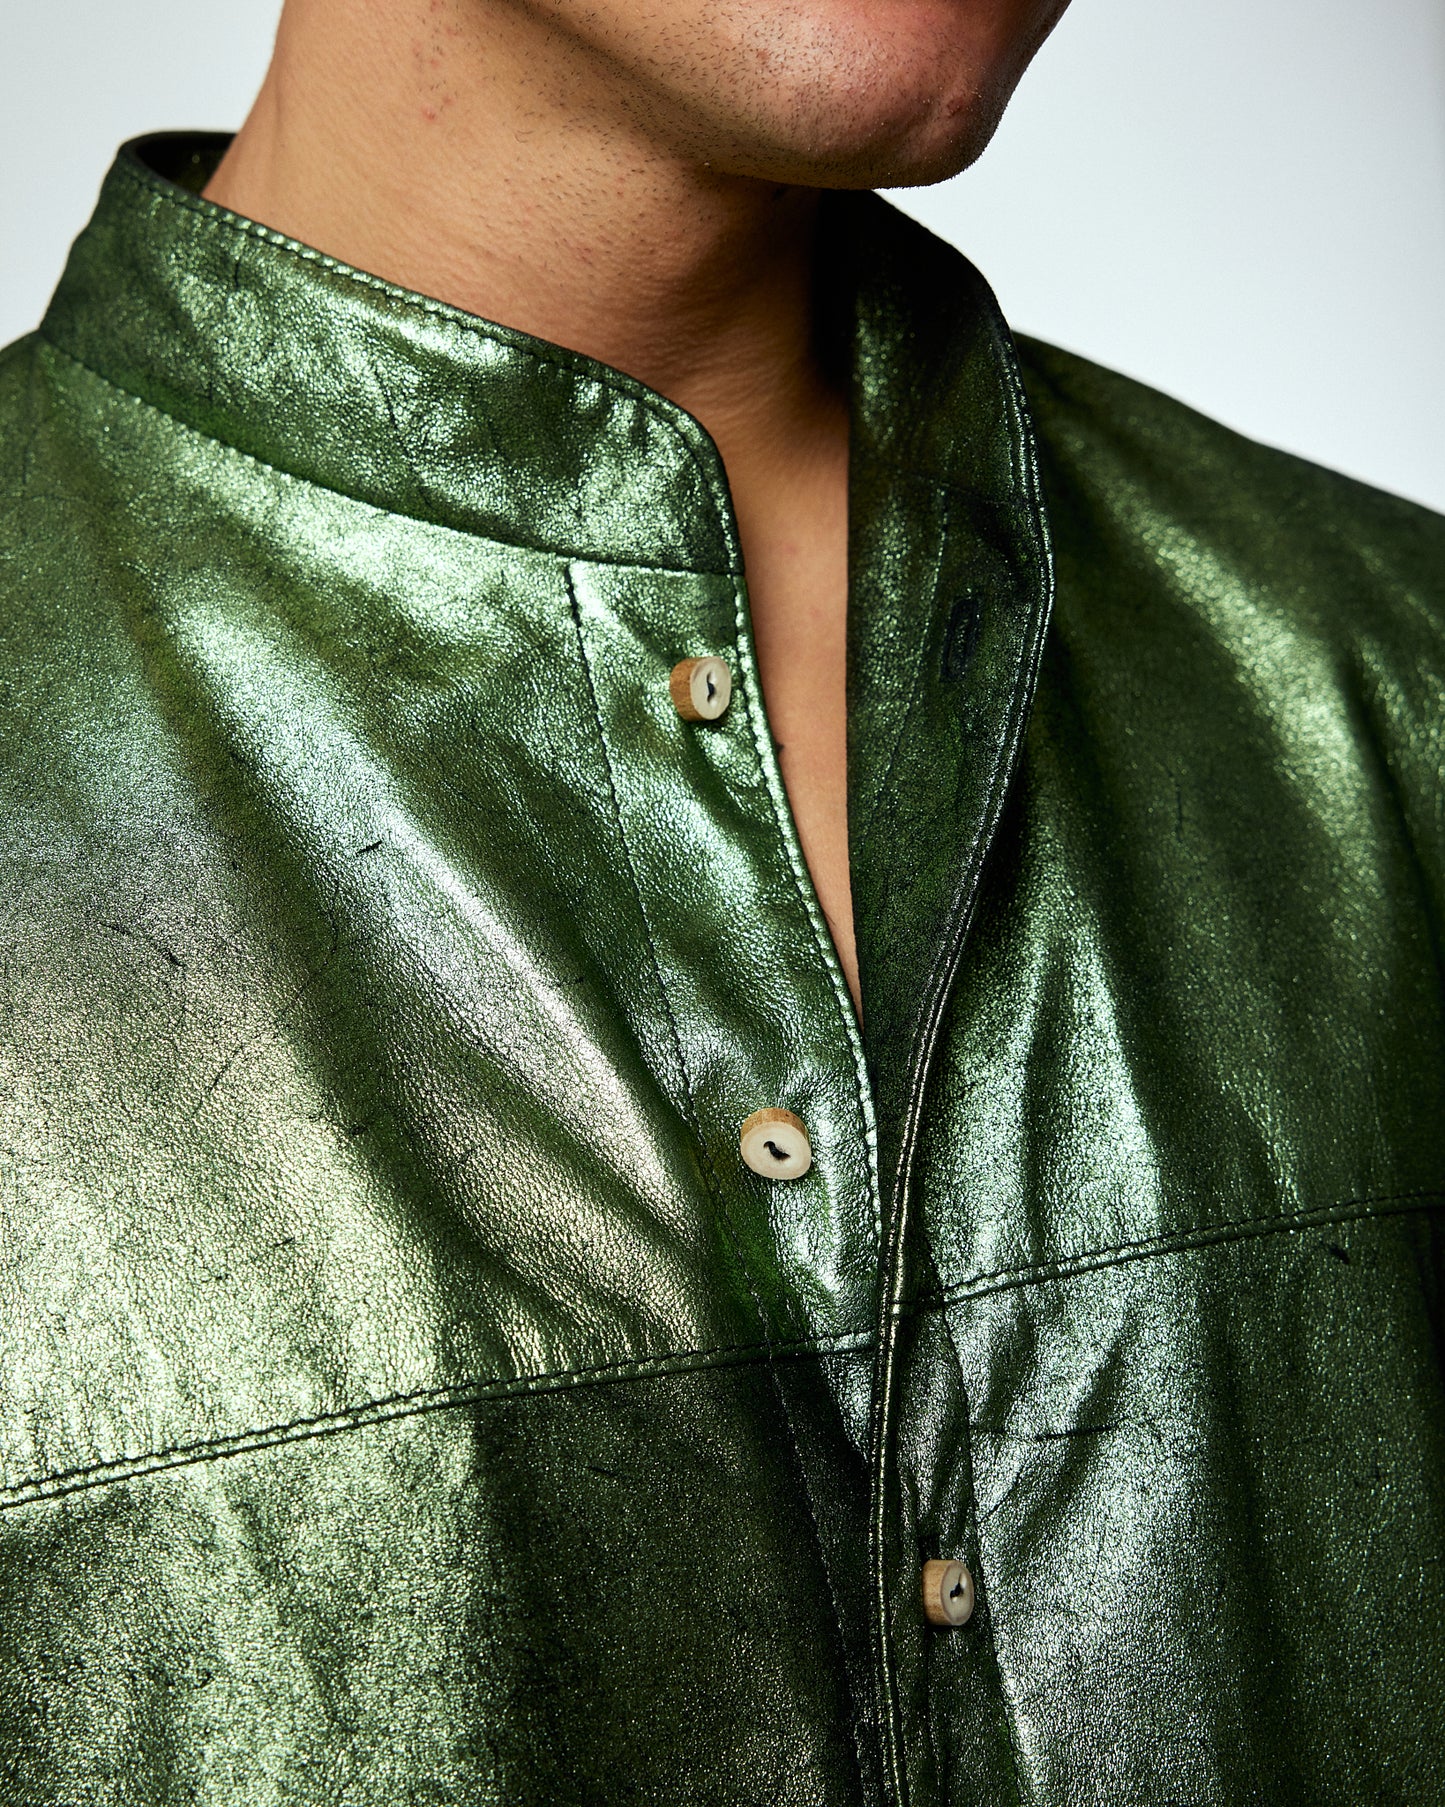 Irgi shirt (male) // MADE-TO-ORDER